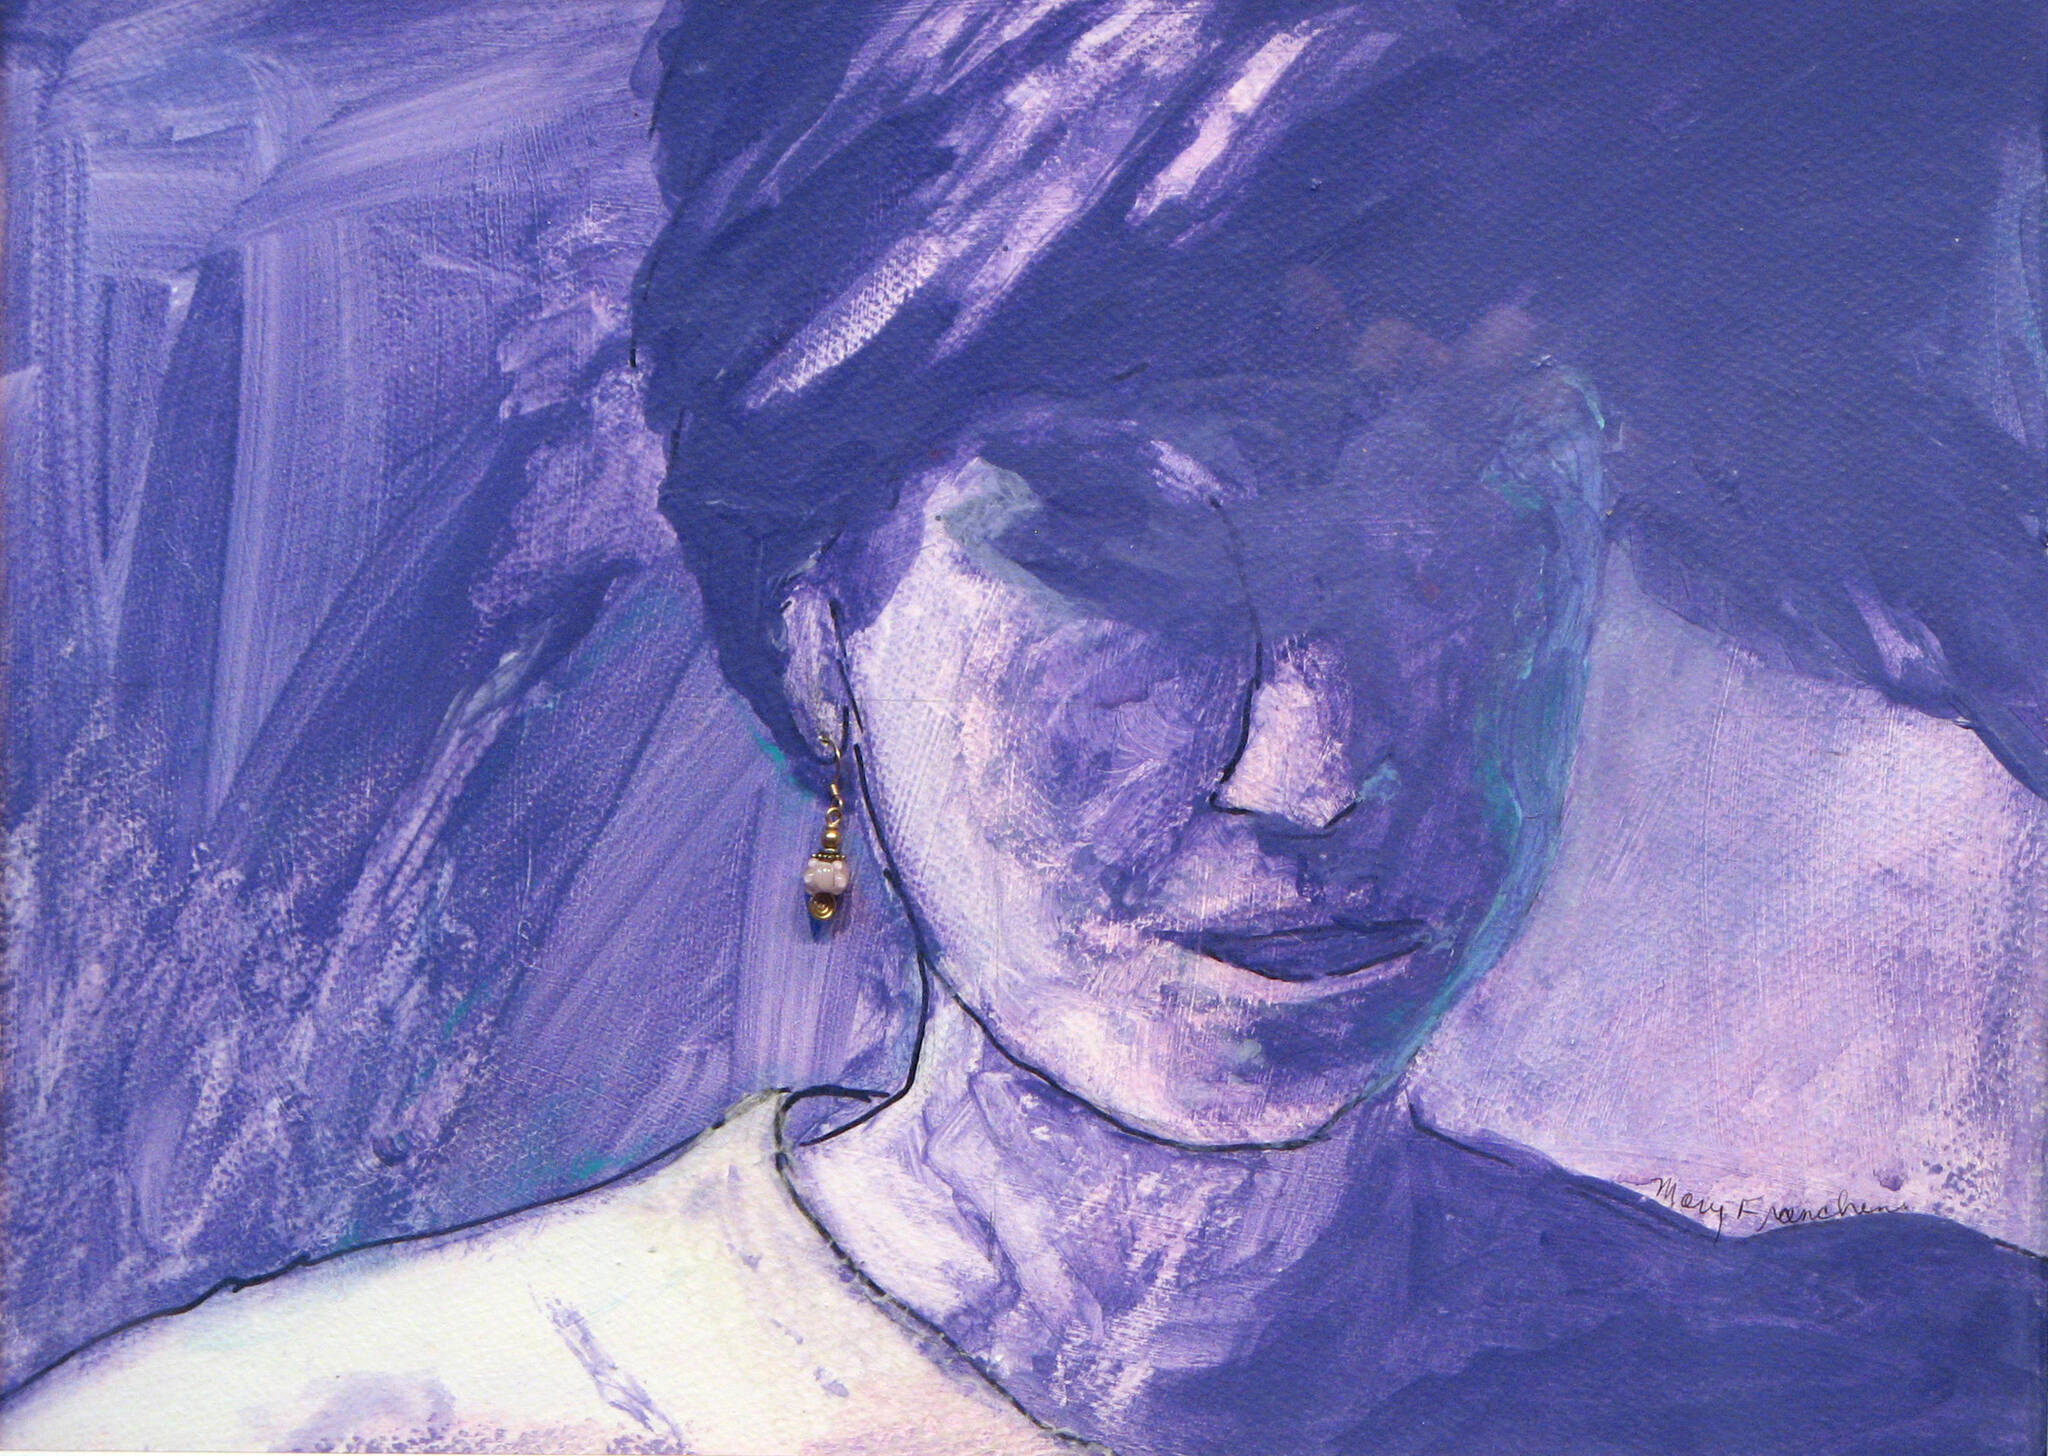 Artwork courtesy of Blue Whole Gallery
Above:“Laura” by Mary Franchini, featured artwork at the Blue Whole Gallery’s June 2023 exhibit, “Picture This #26.” A longtime gallery member, Franchini is curator of the exhibit.
Below right: “Lavender Sunrise” by Julie Senf.